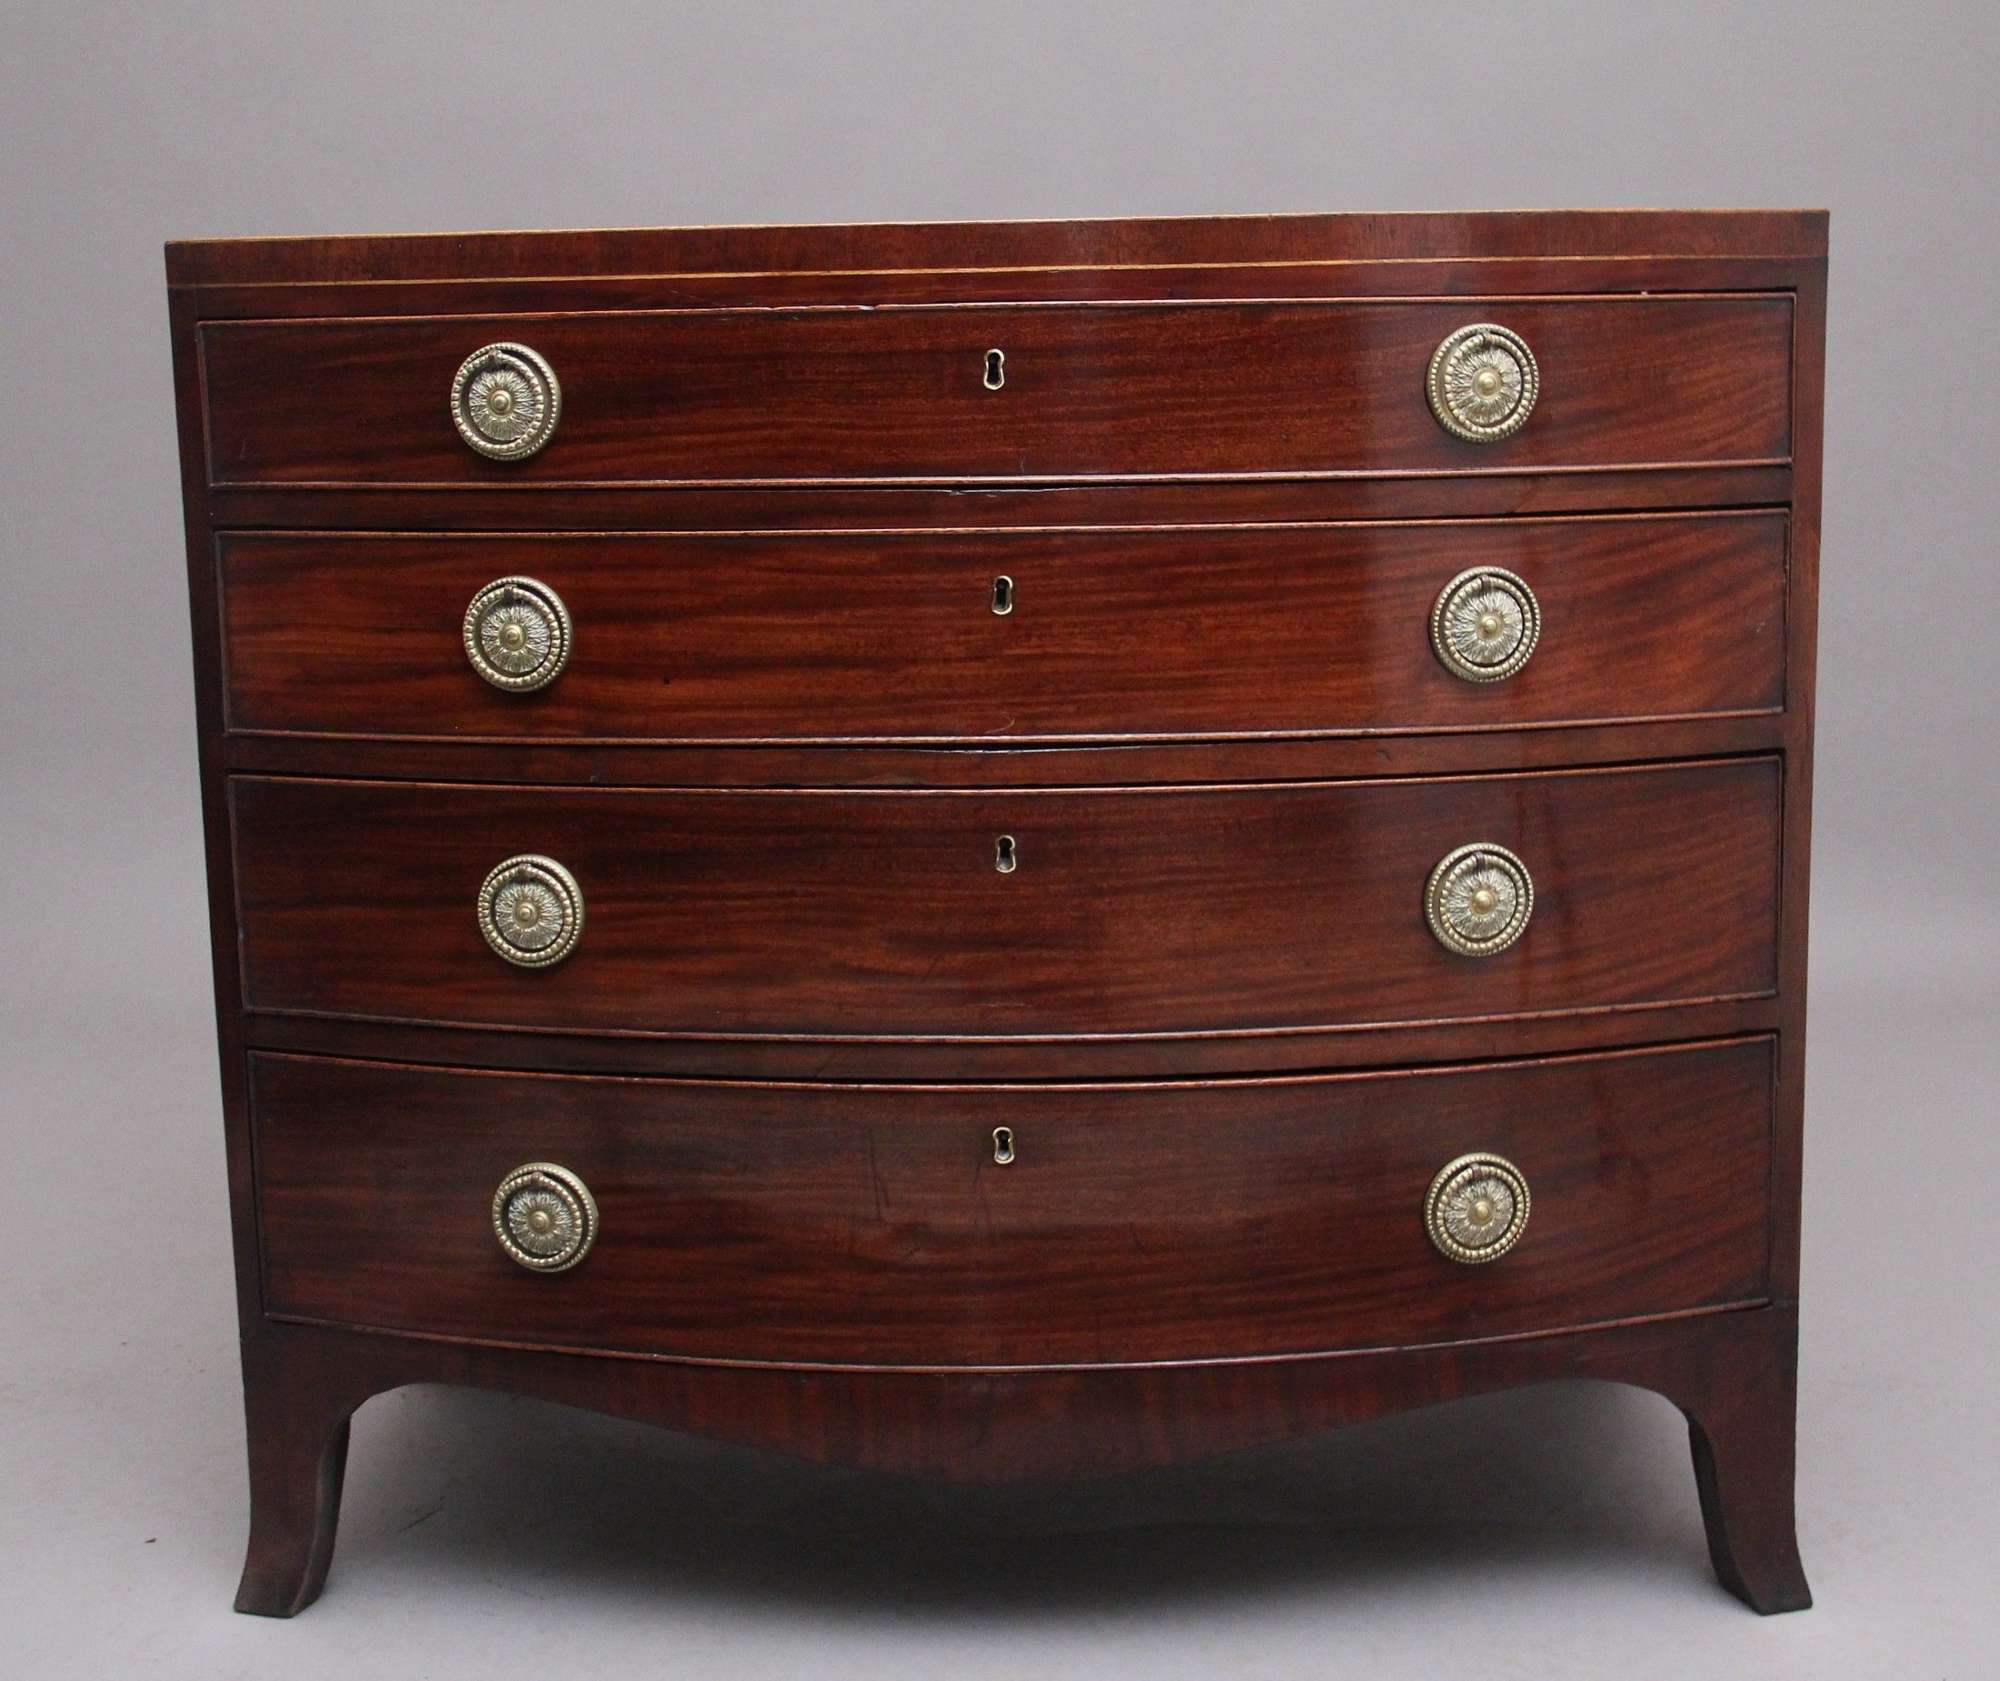 Early 19th Century Georgian Antique Chest Of Drawers